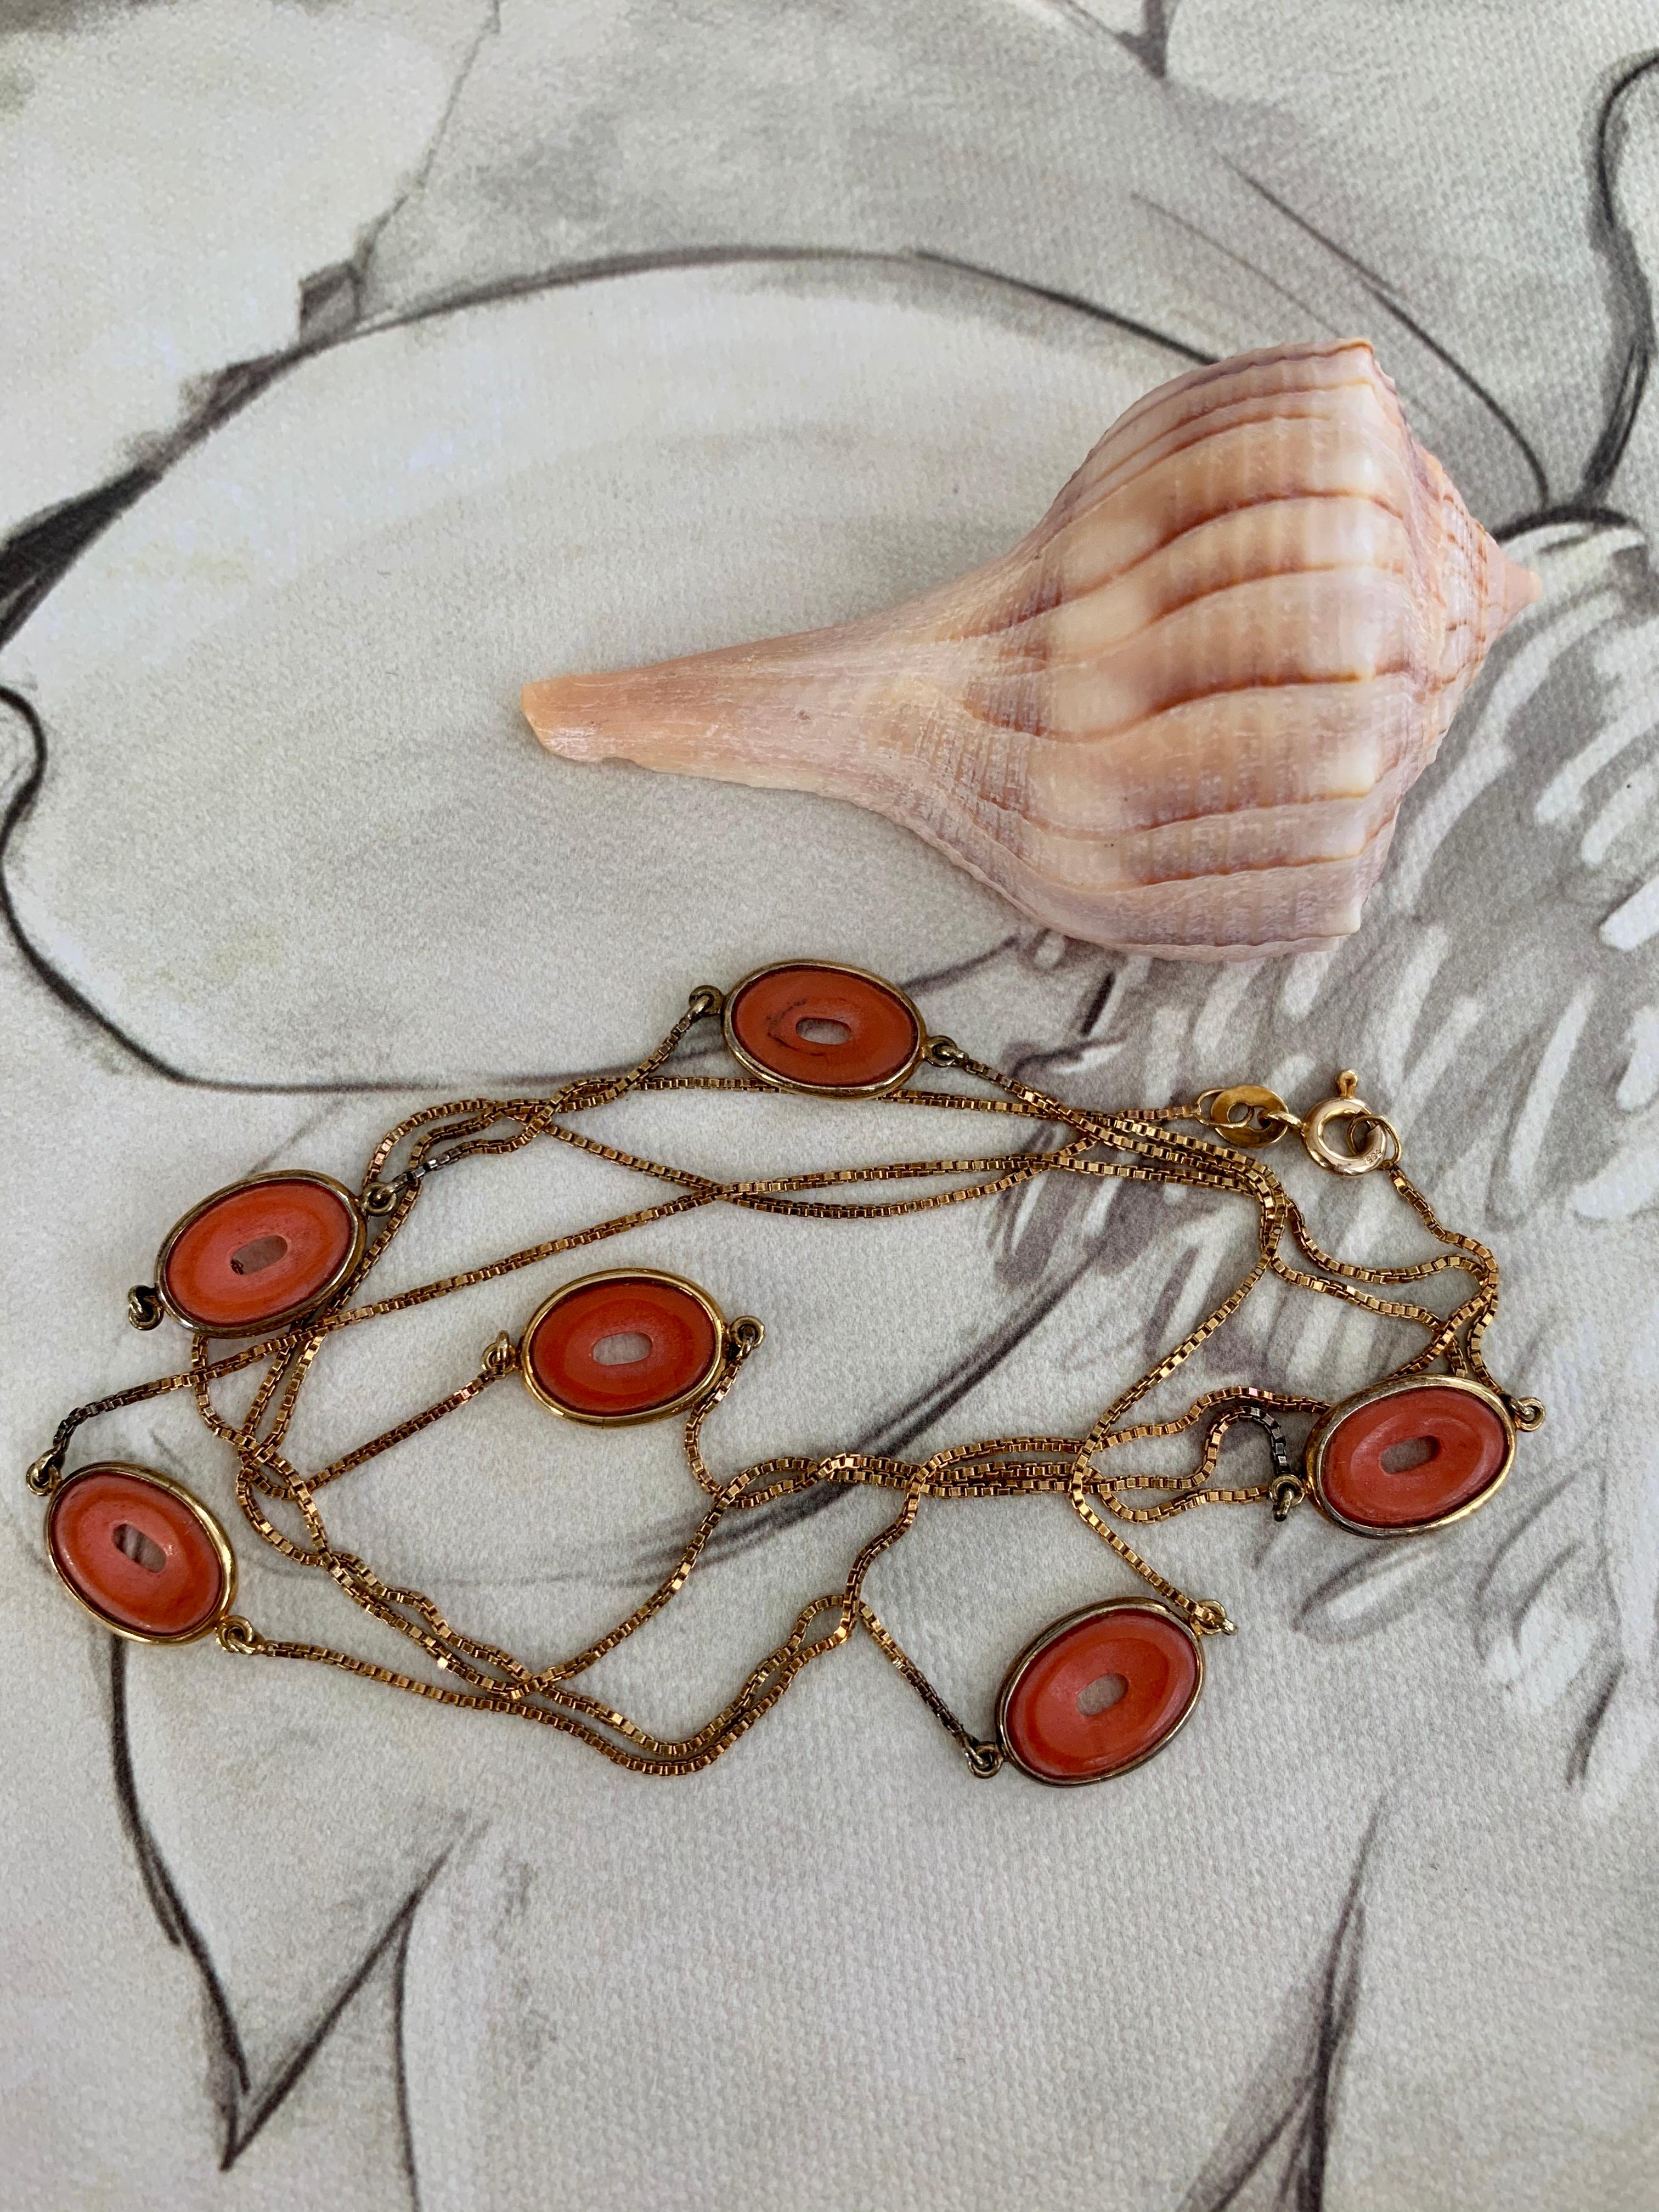 This beautiful vintage necklace is right out of the 1950's.  The links of the necklace are made from disc-shaped pieces of Coral.  The Coral, and the design, are absolutely gorgeous.  

The chain is 34